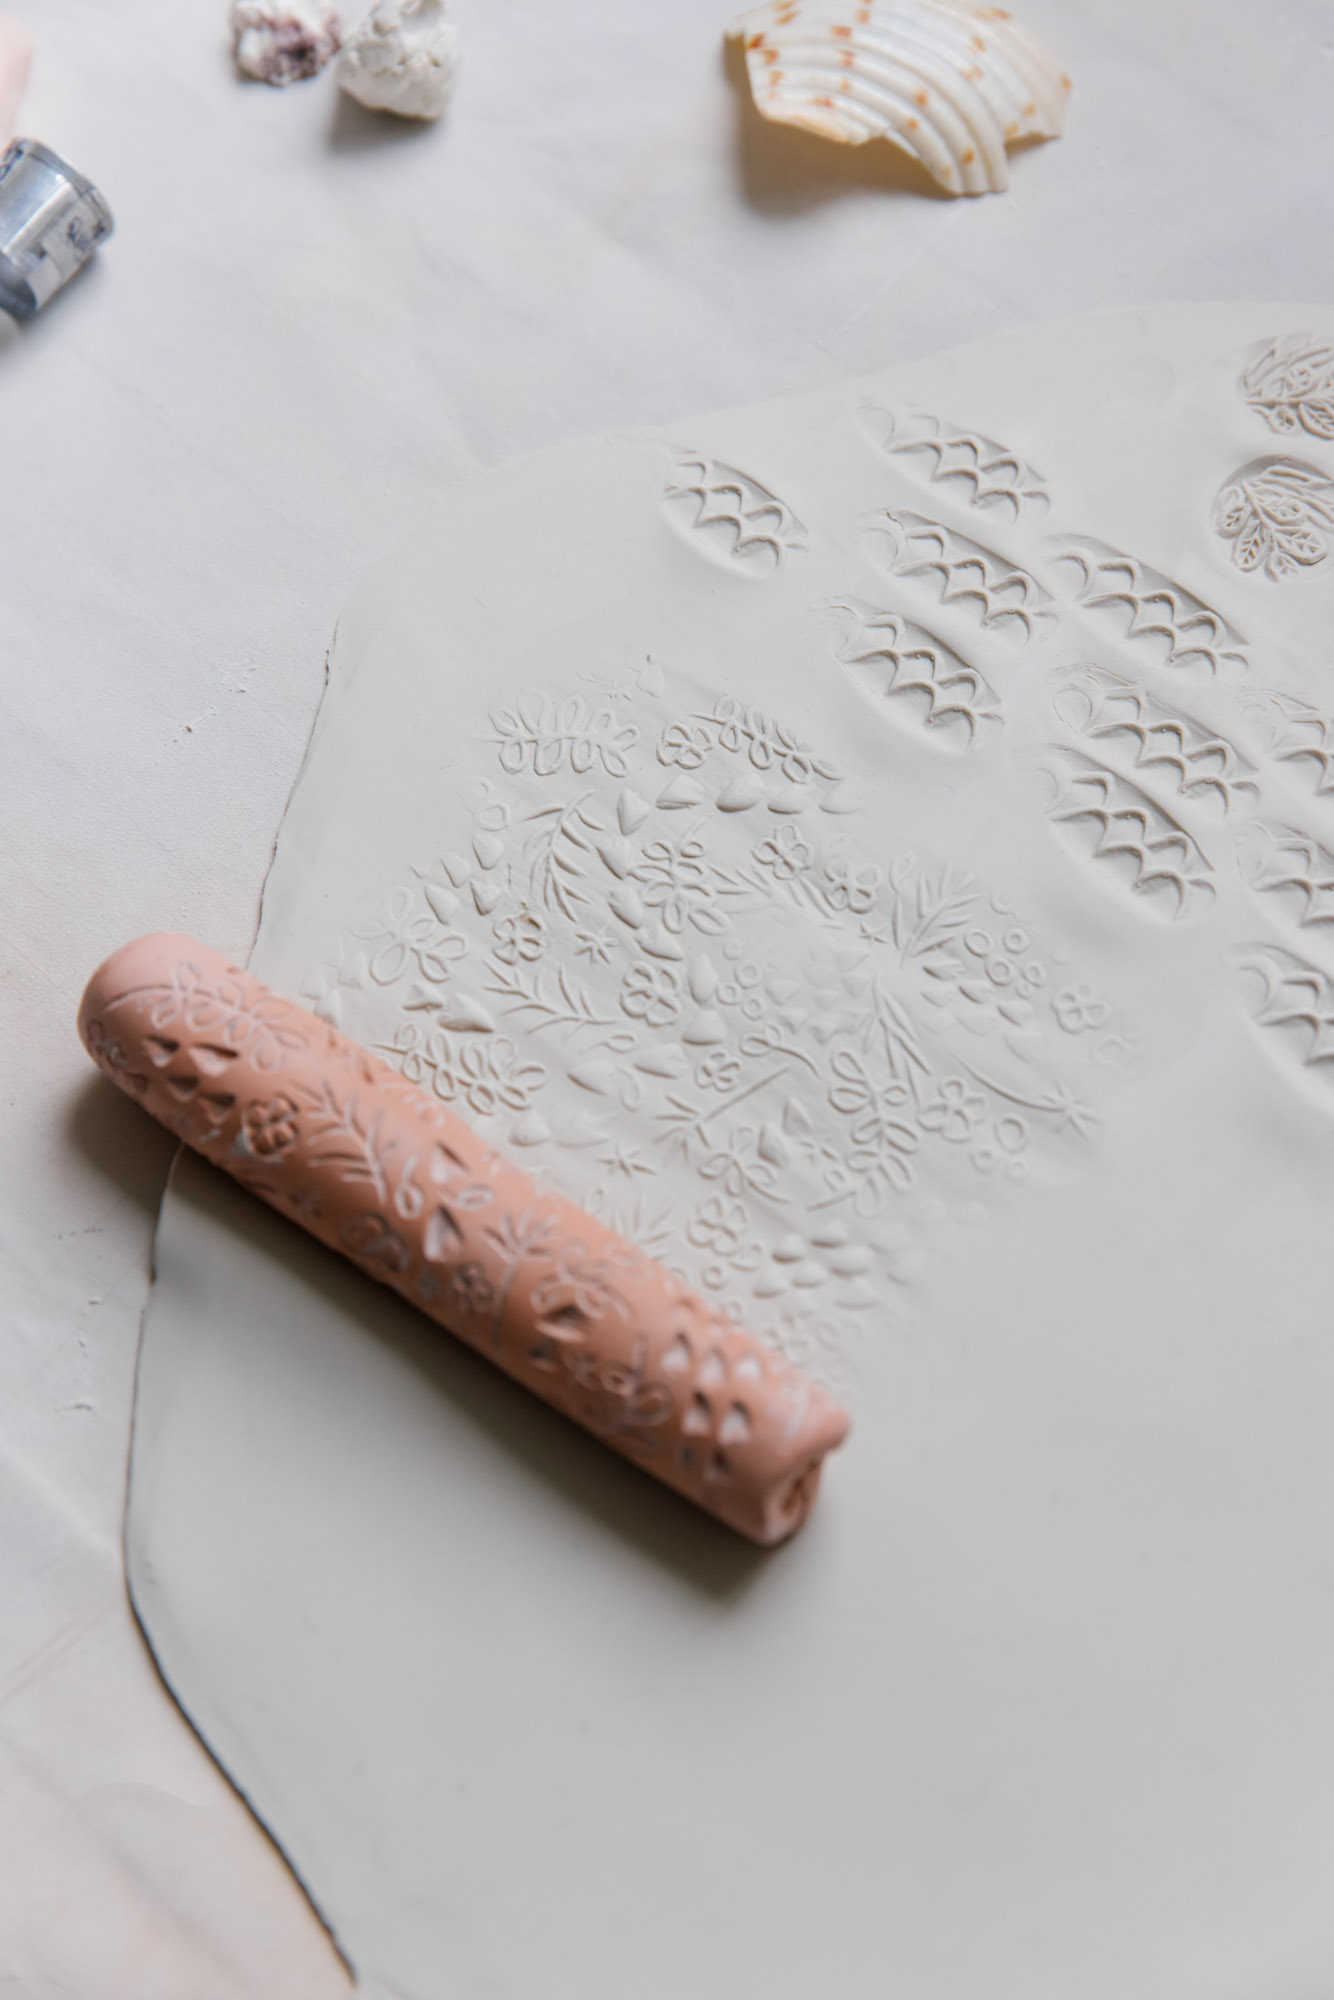 Making patterns on clay using a handmade stamp